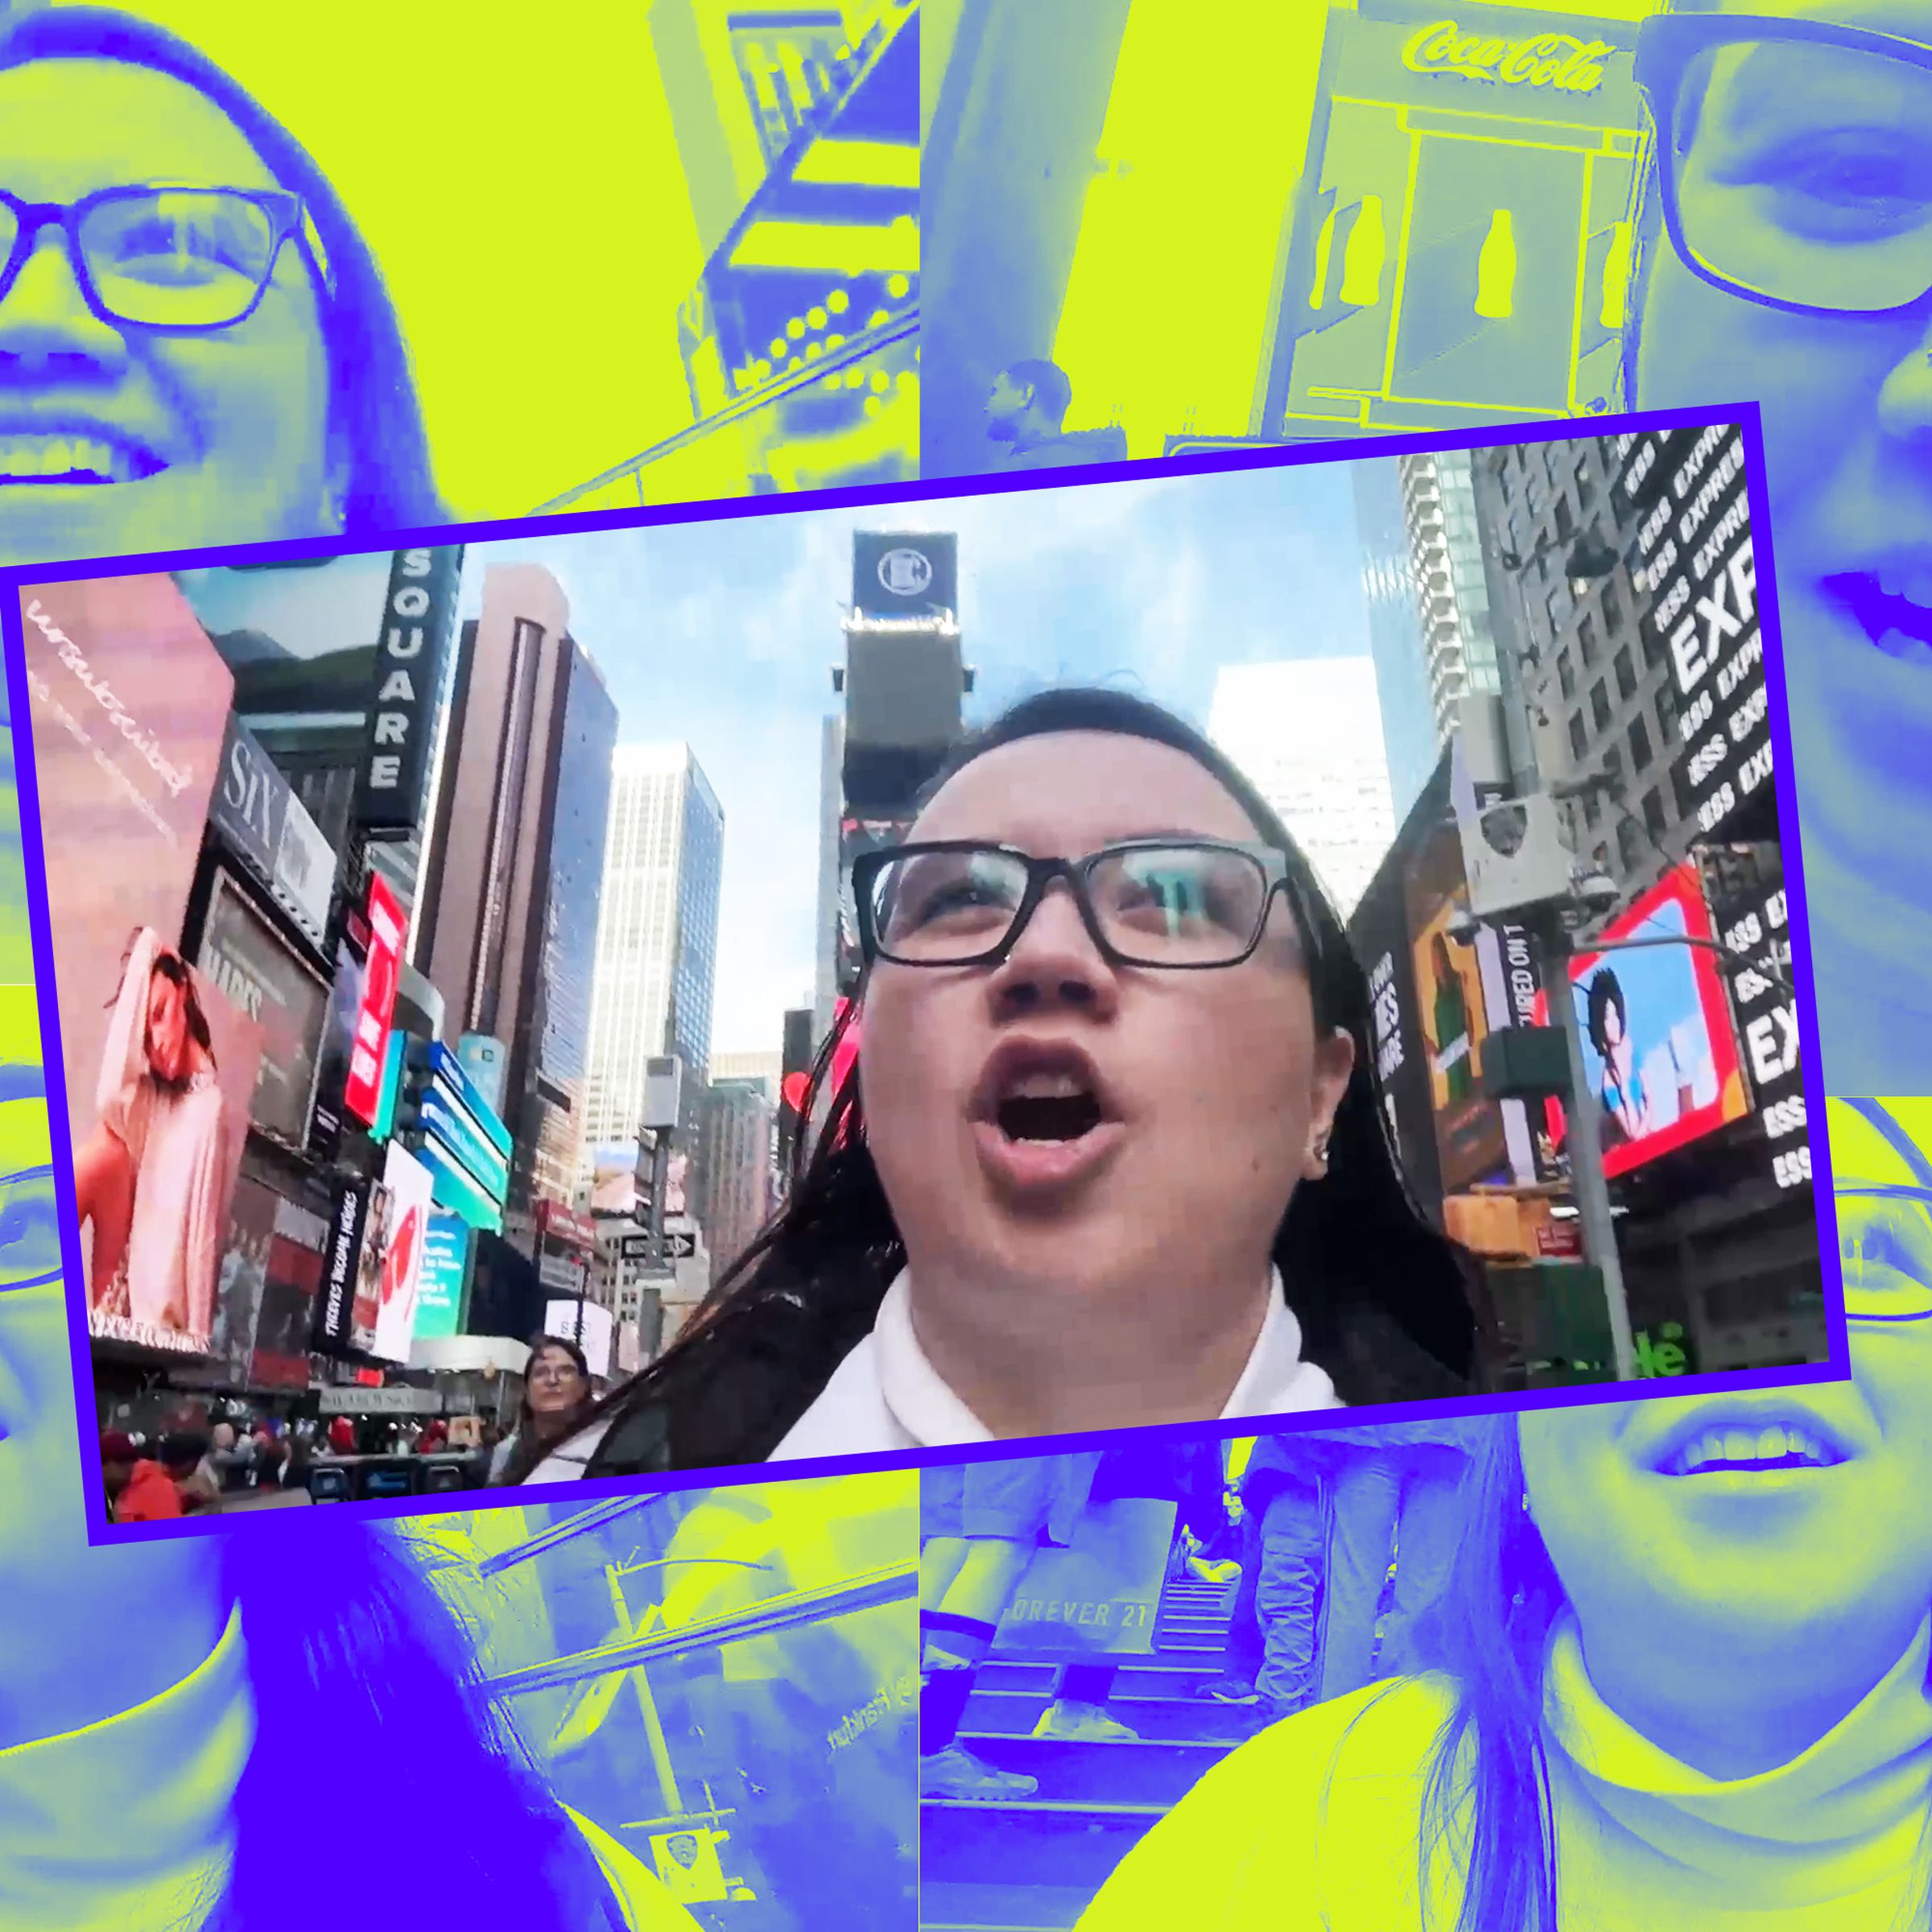 Compilation of screenshots of video calls from Times Square